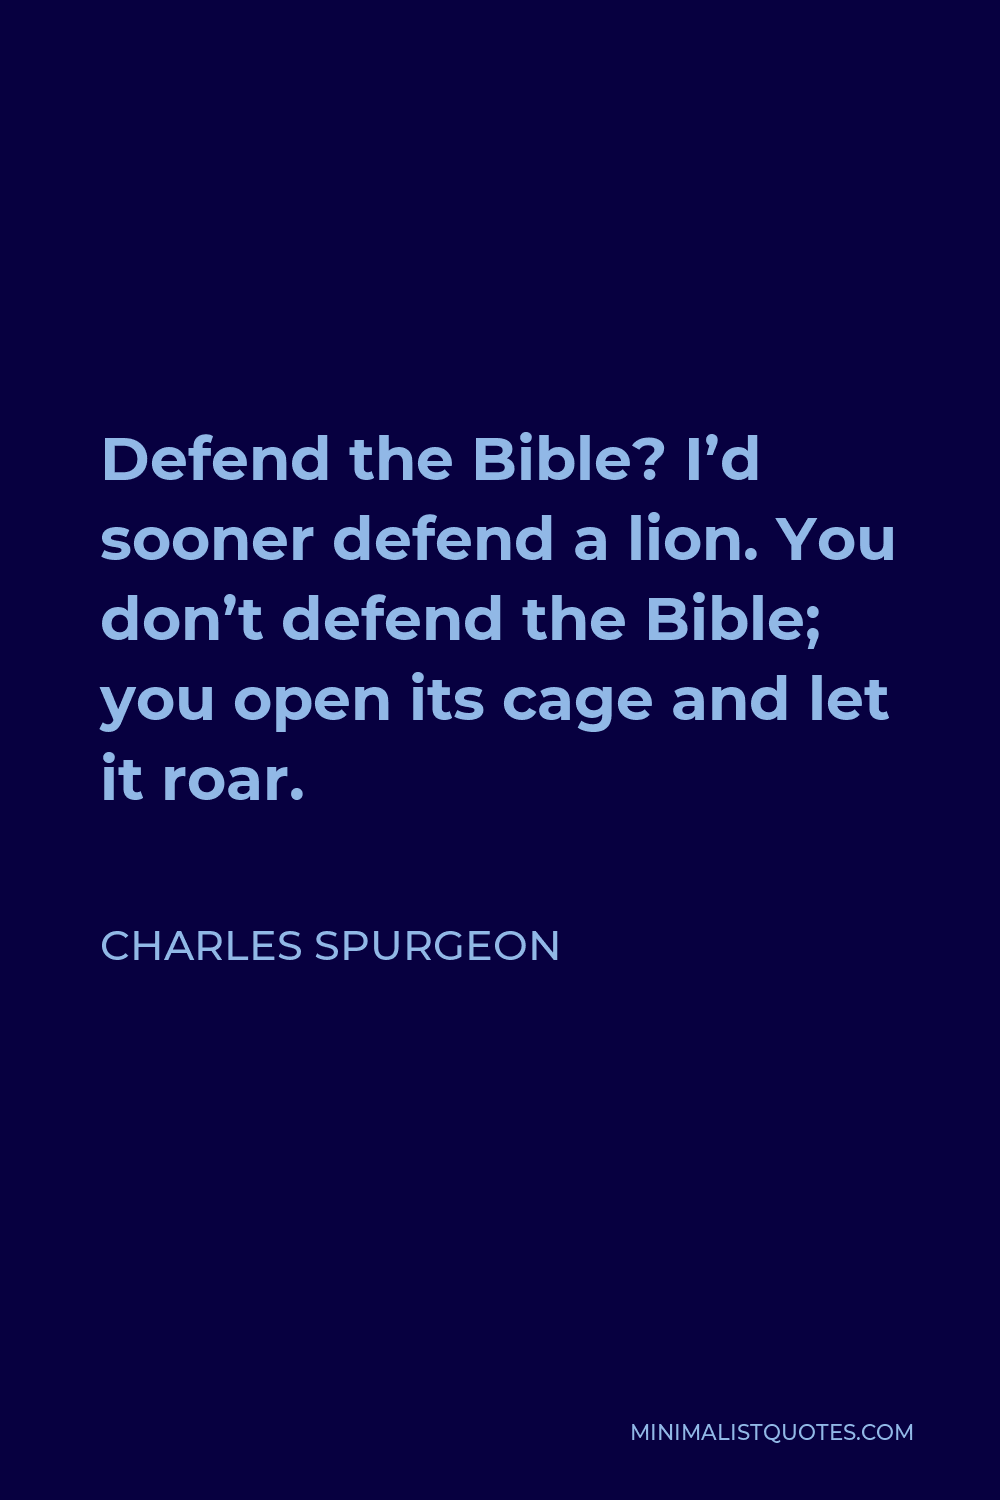 Charles Spurgeon Quote - Defend the Bible? I’d sooner defend a lion. You don’t defend the Bible; you open its cage and let it roar.